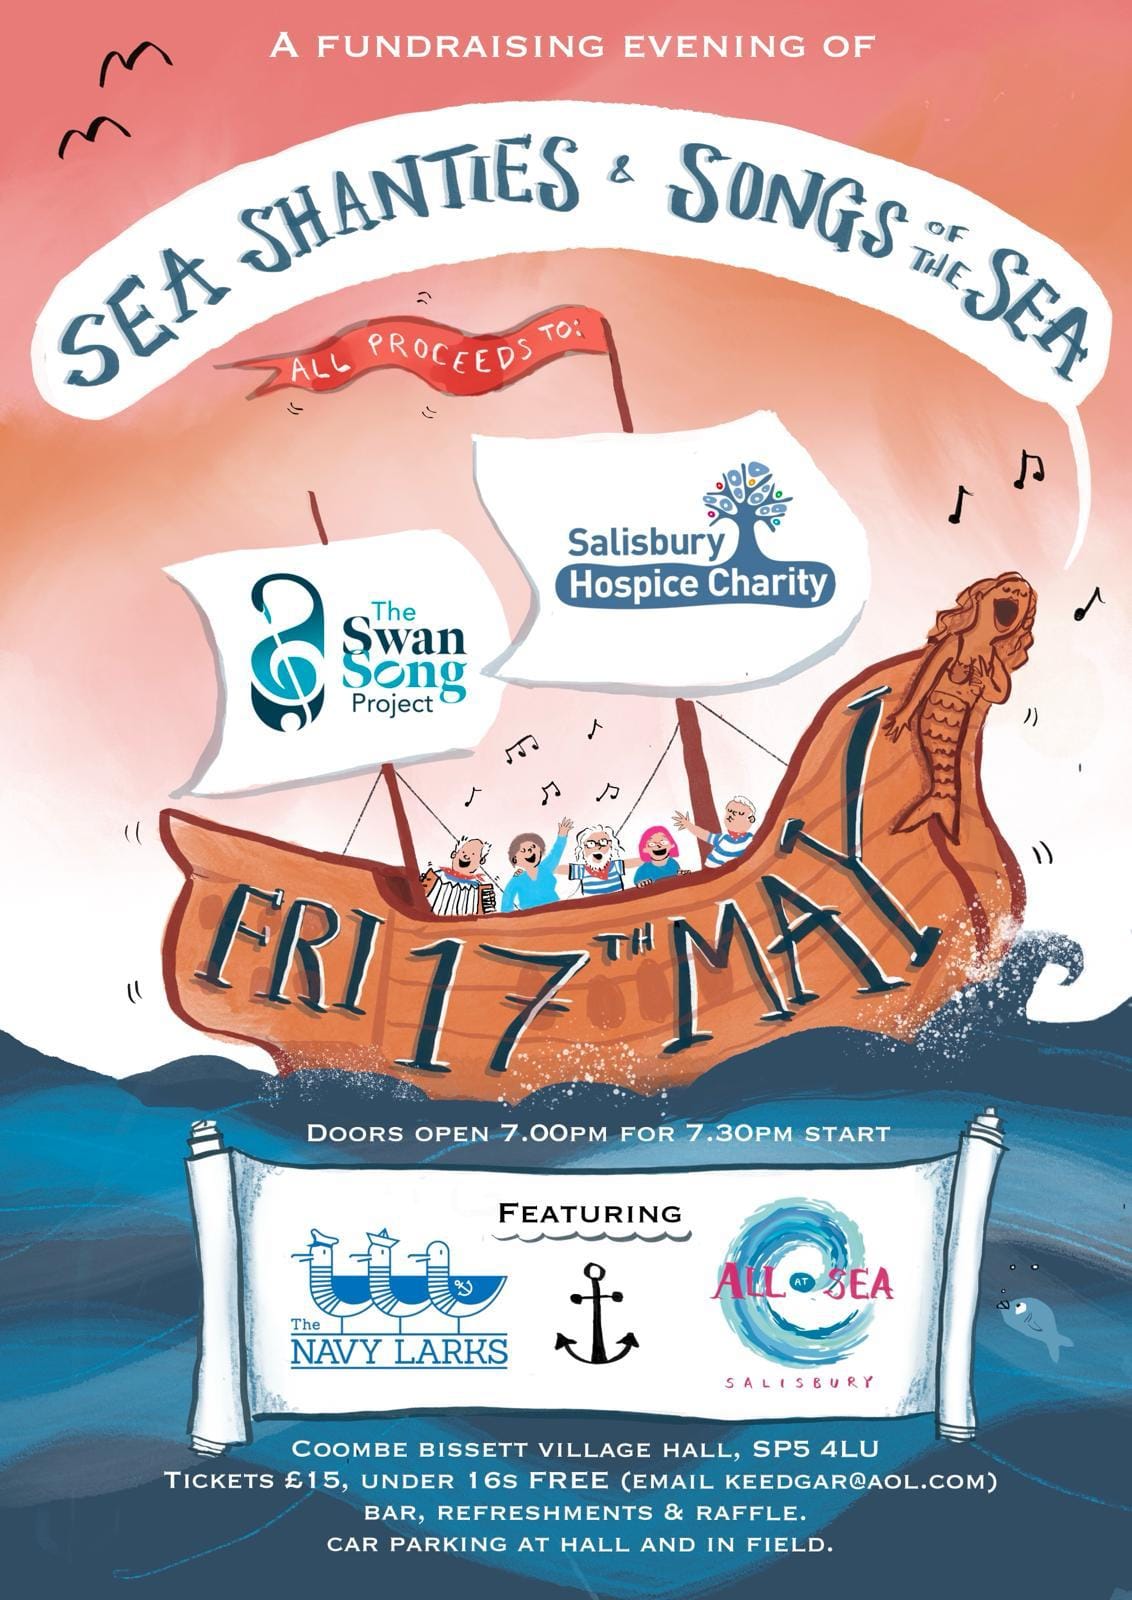 Sea Shanties & Songs of the Sea featuring choirs THE NAVY LARKS + ALL AT SEA